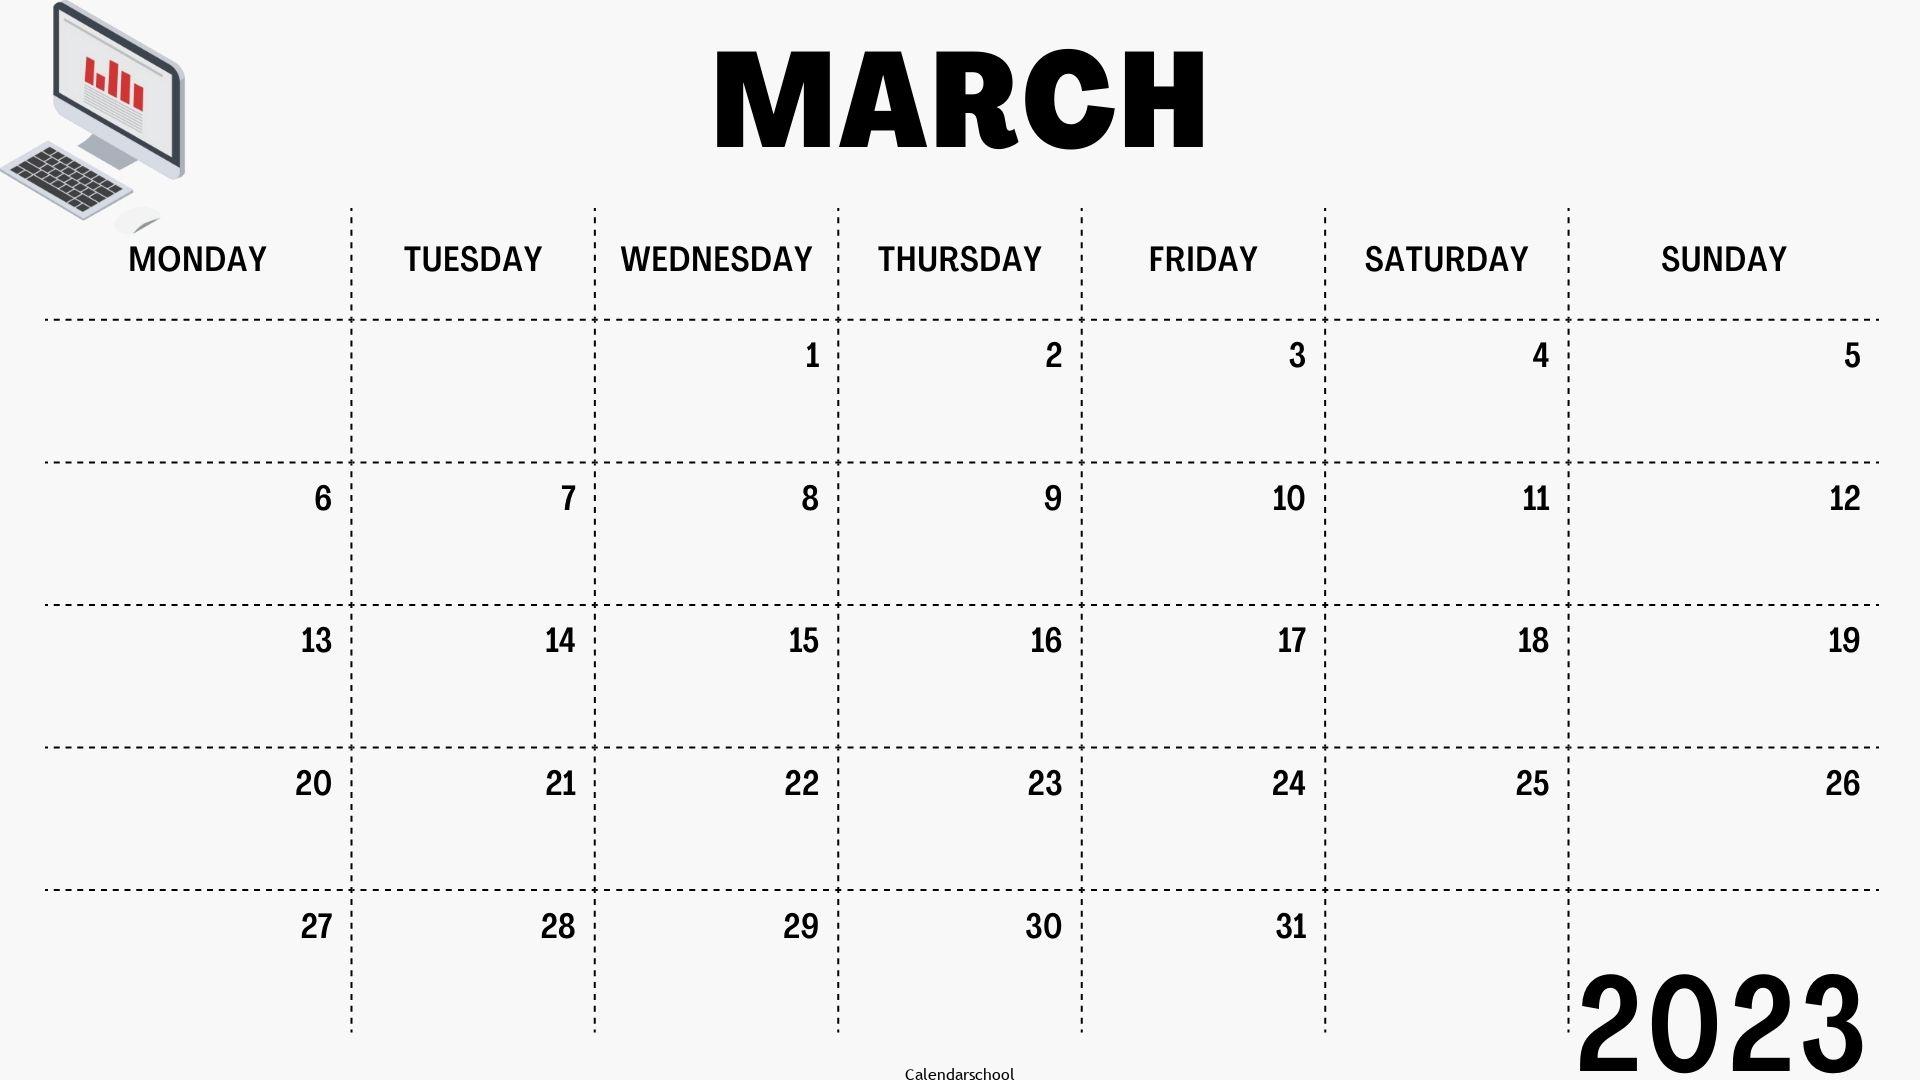 March 2023 Calendar Template For PPT